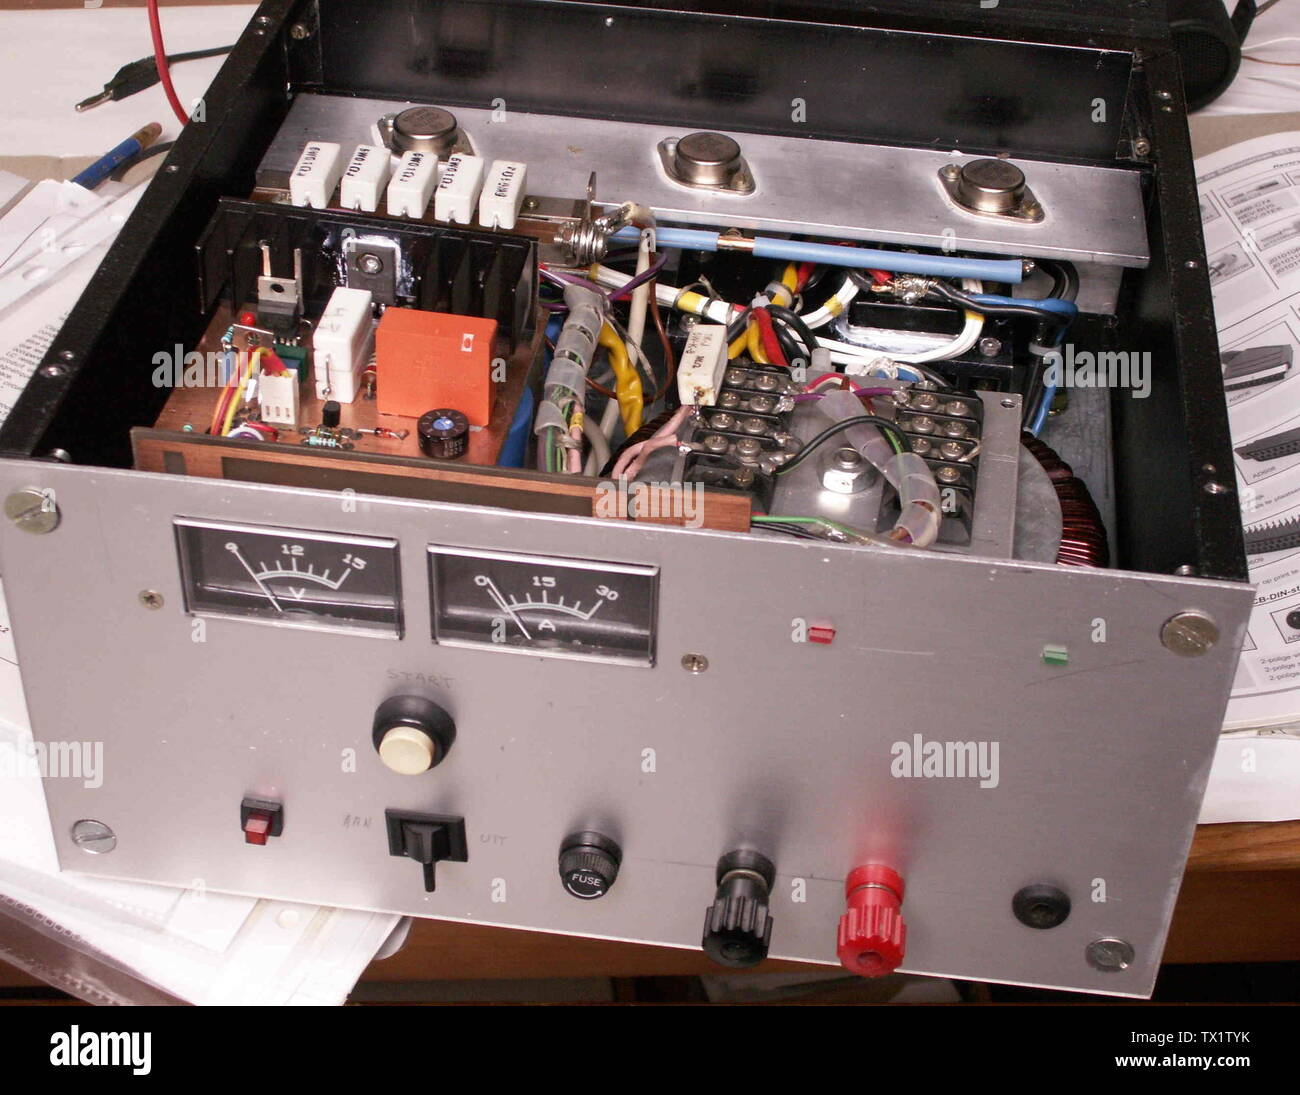 A power supply unit for powering amateur radio equipment. The unit is made entirely DIY.; 24 June 2008 (original upload date); Own work (Original text:  I created this work entirely by myself.); KVDP (talk); Stock Photo